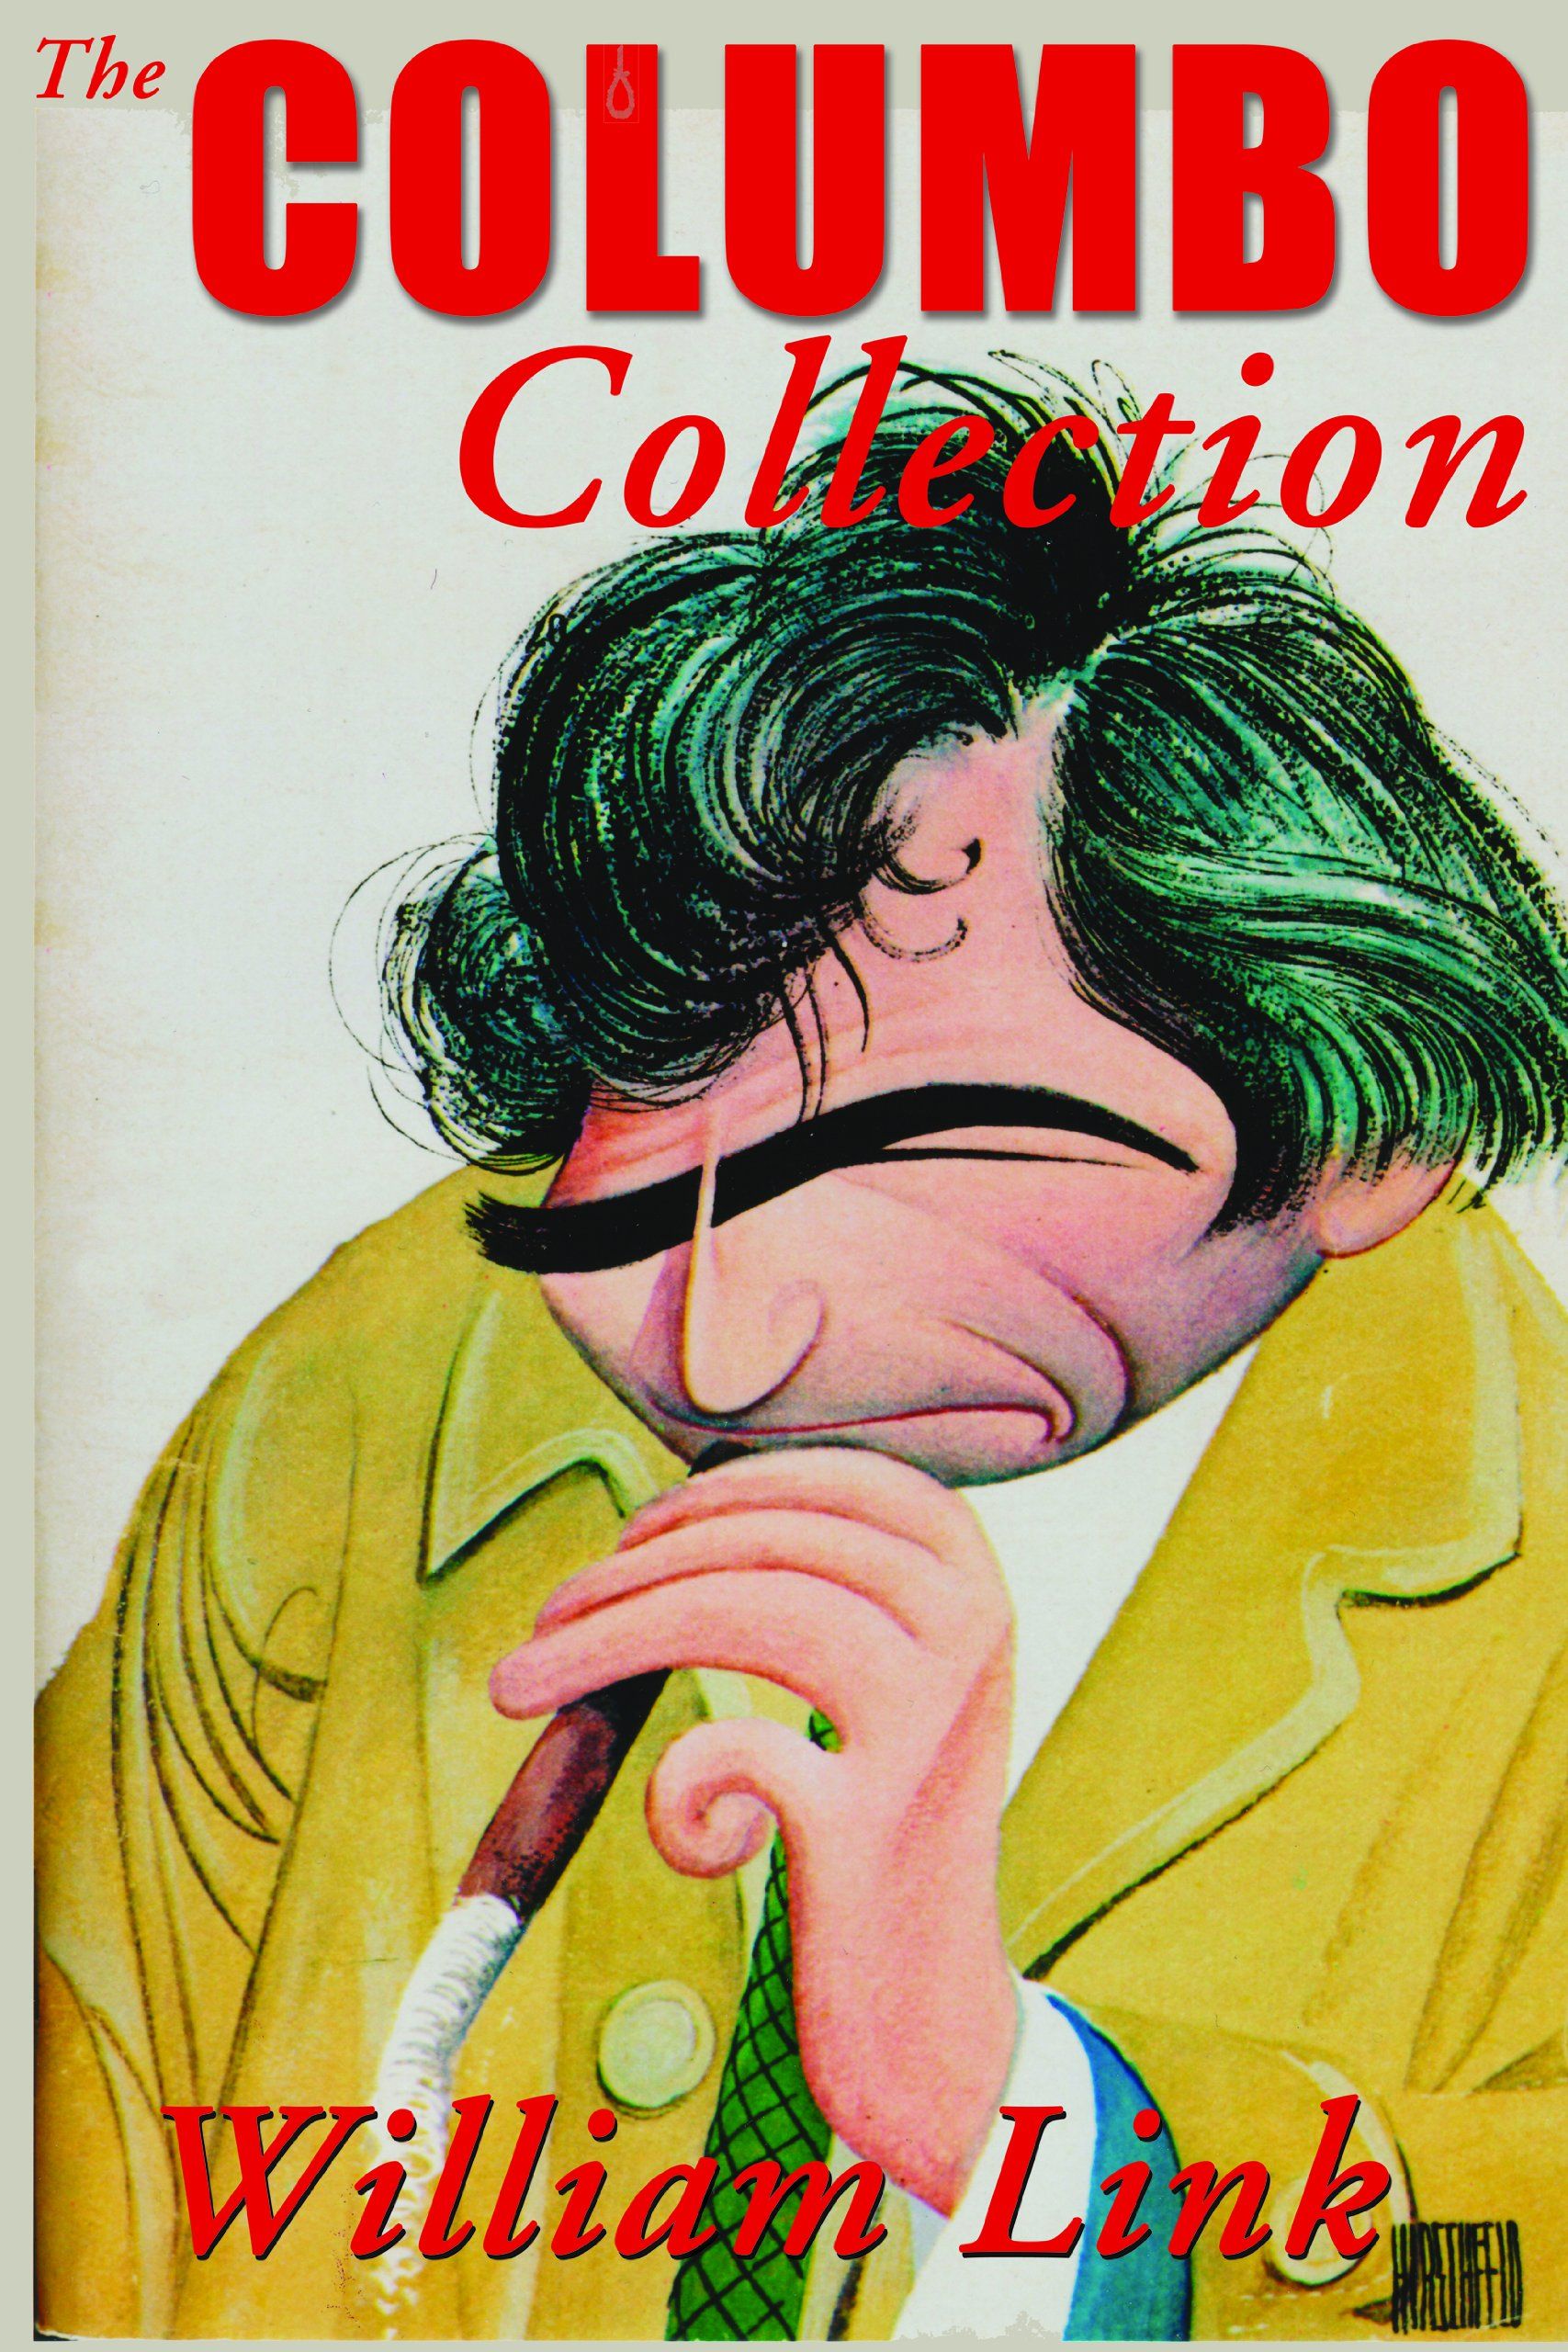 Caricature of Columbo on a book by William Link